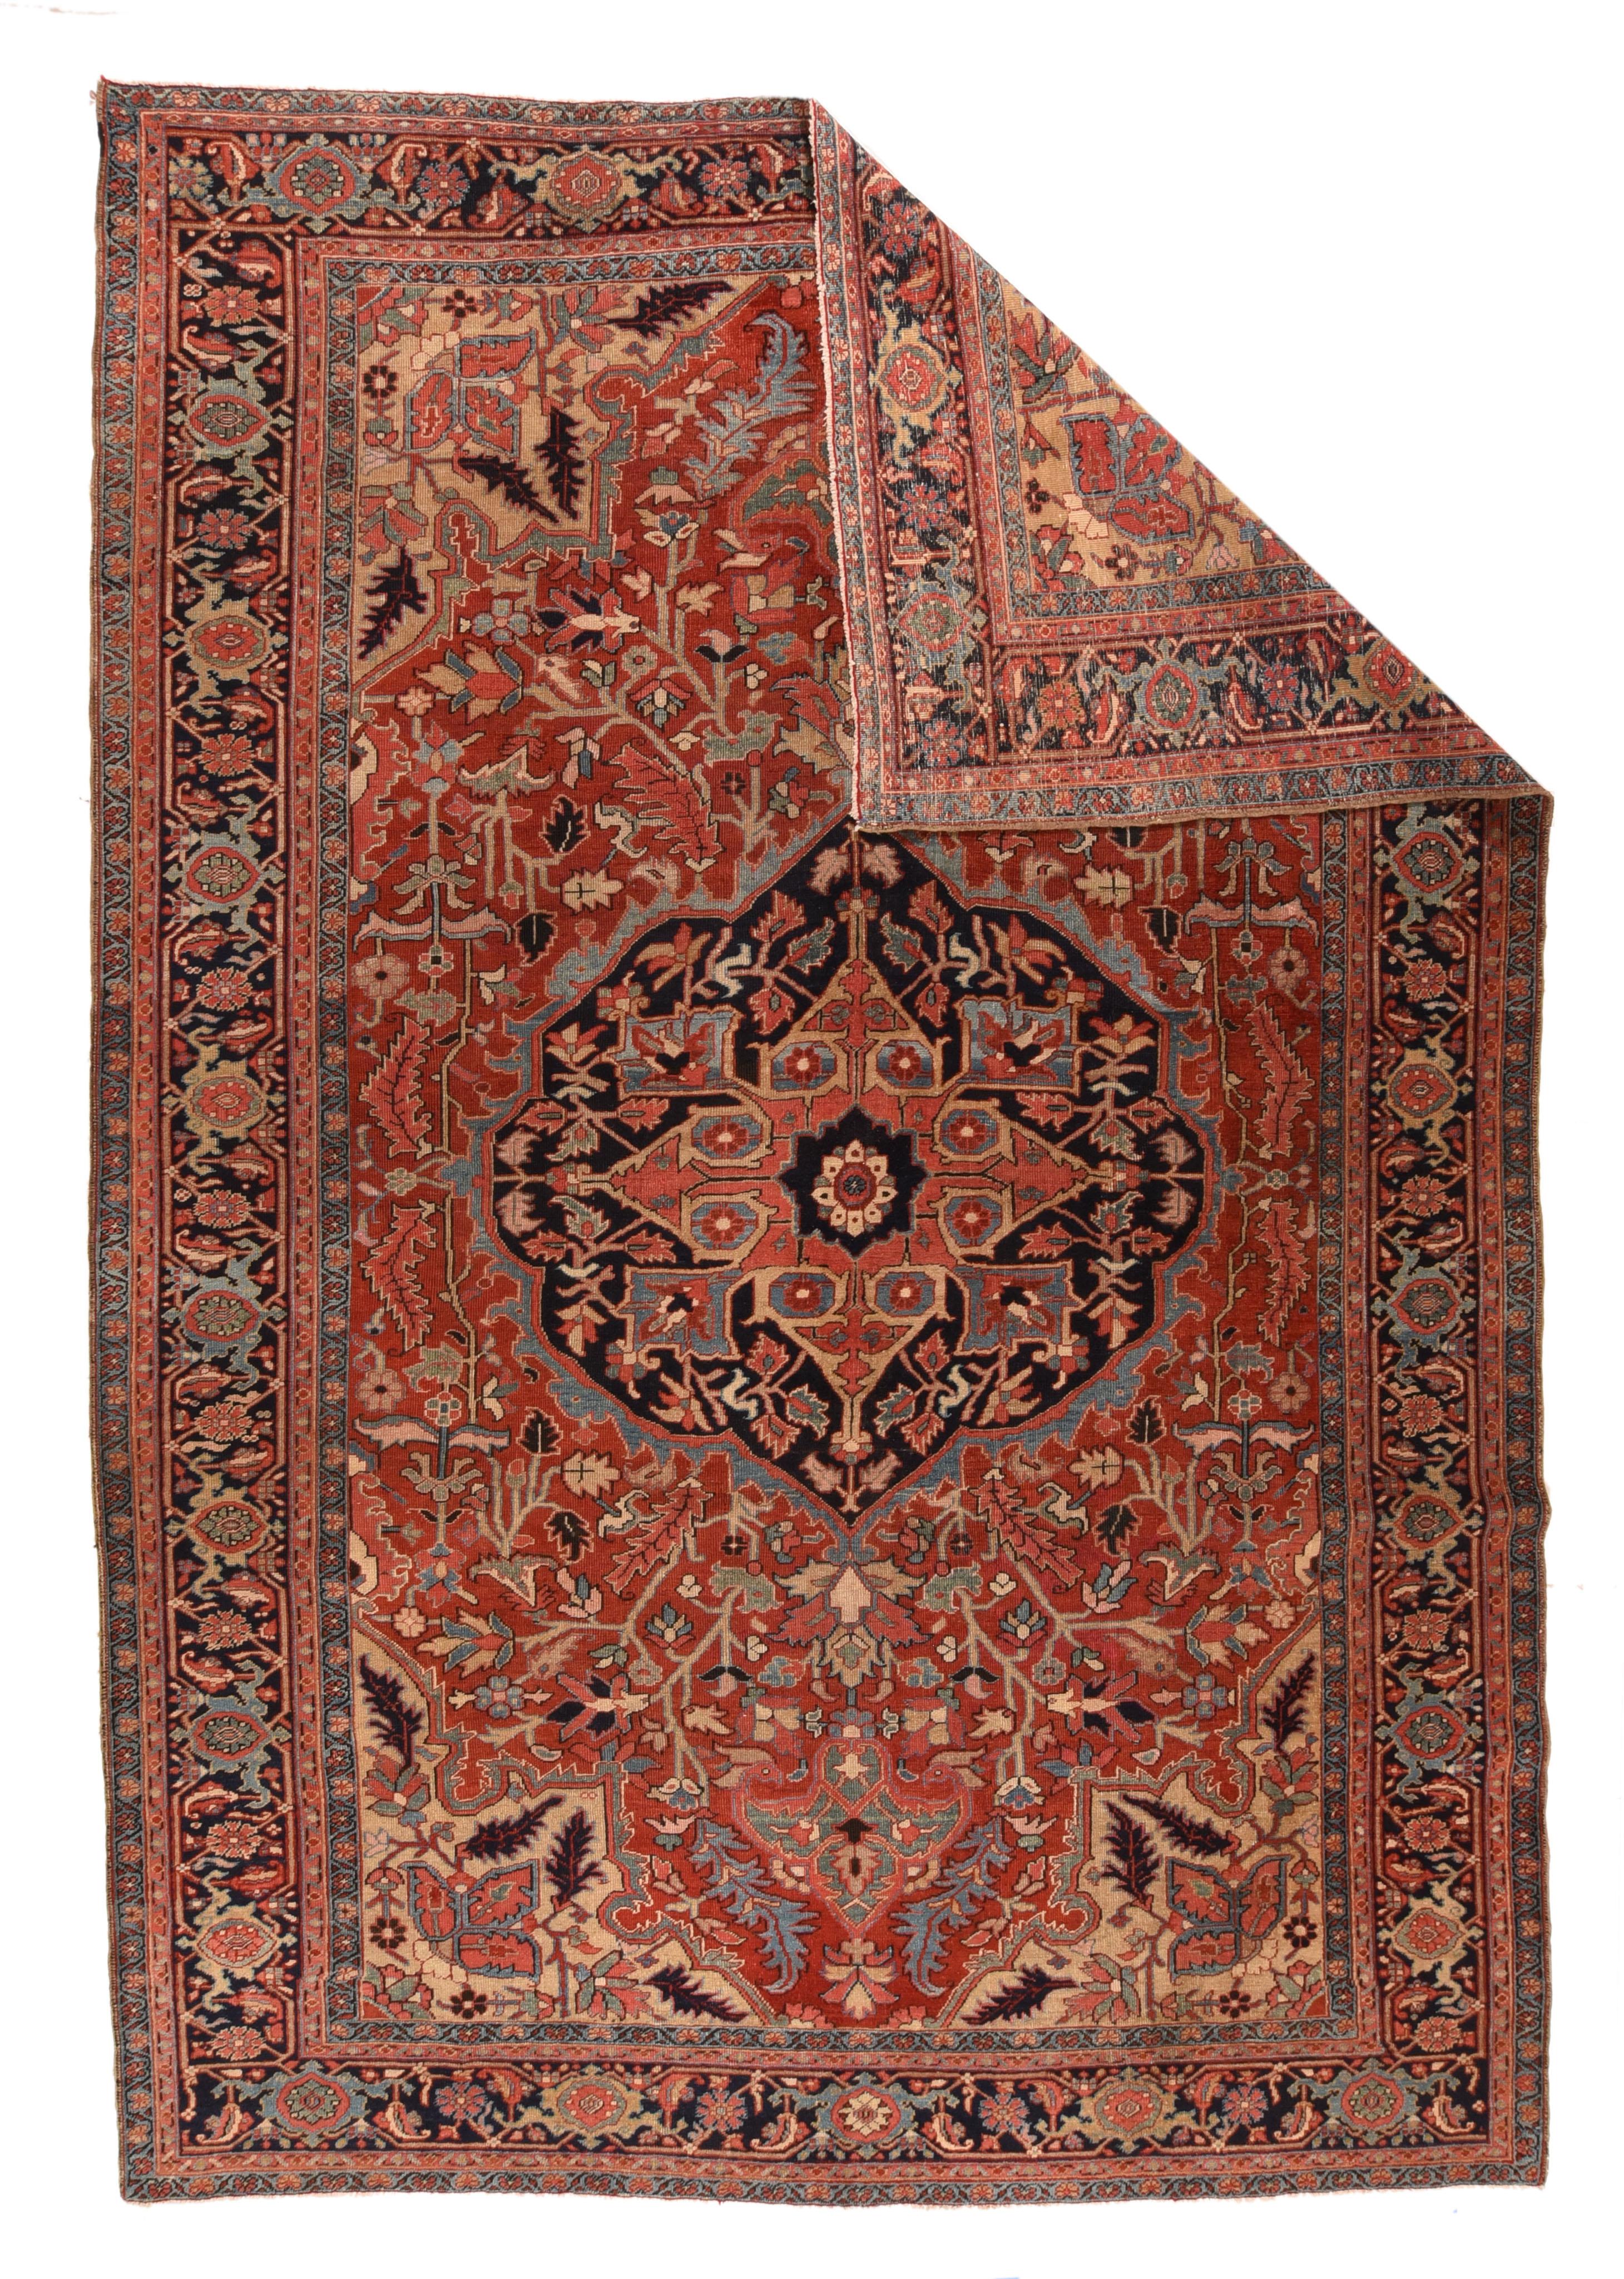 Antique Heriz Serapi rug 8'9'' x 12'6''. Classically Heriz, with a shaped and pointed navy medallion centred by a rose concave diamond, on a natural madder red field displaying chunky vinery and imaginative flowers, and detached escutcheon pendants.